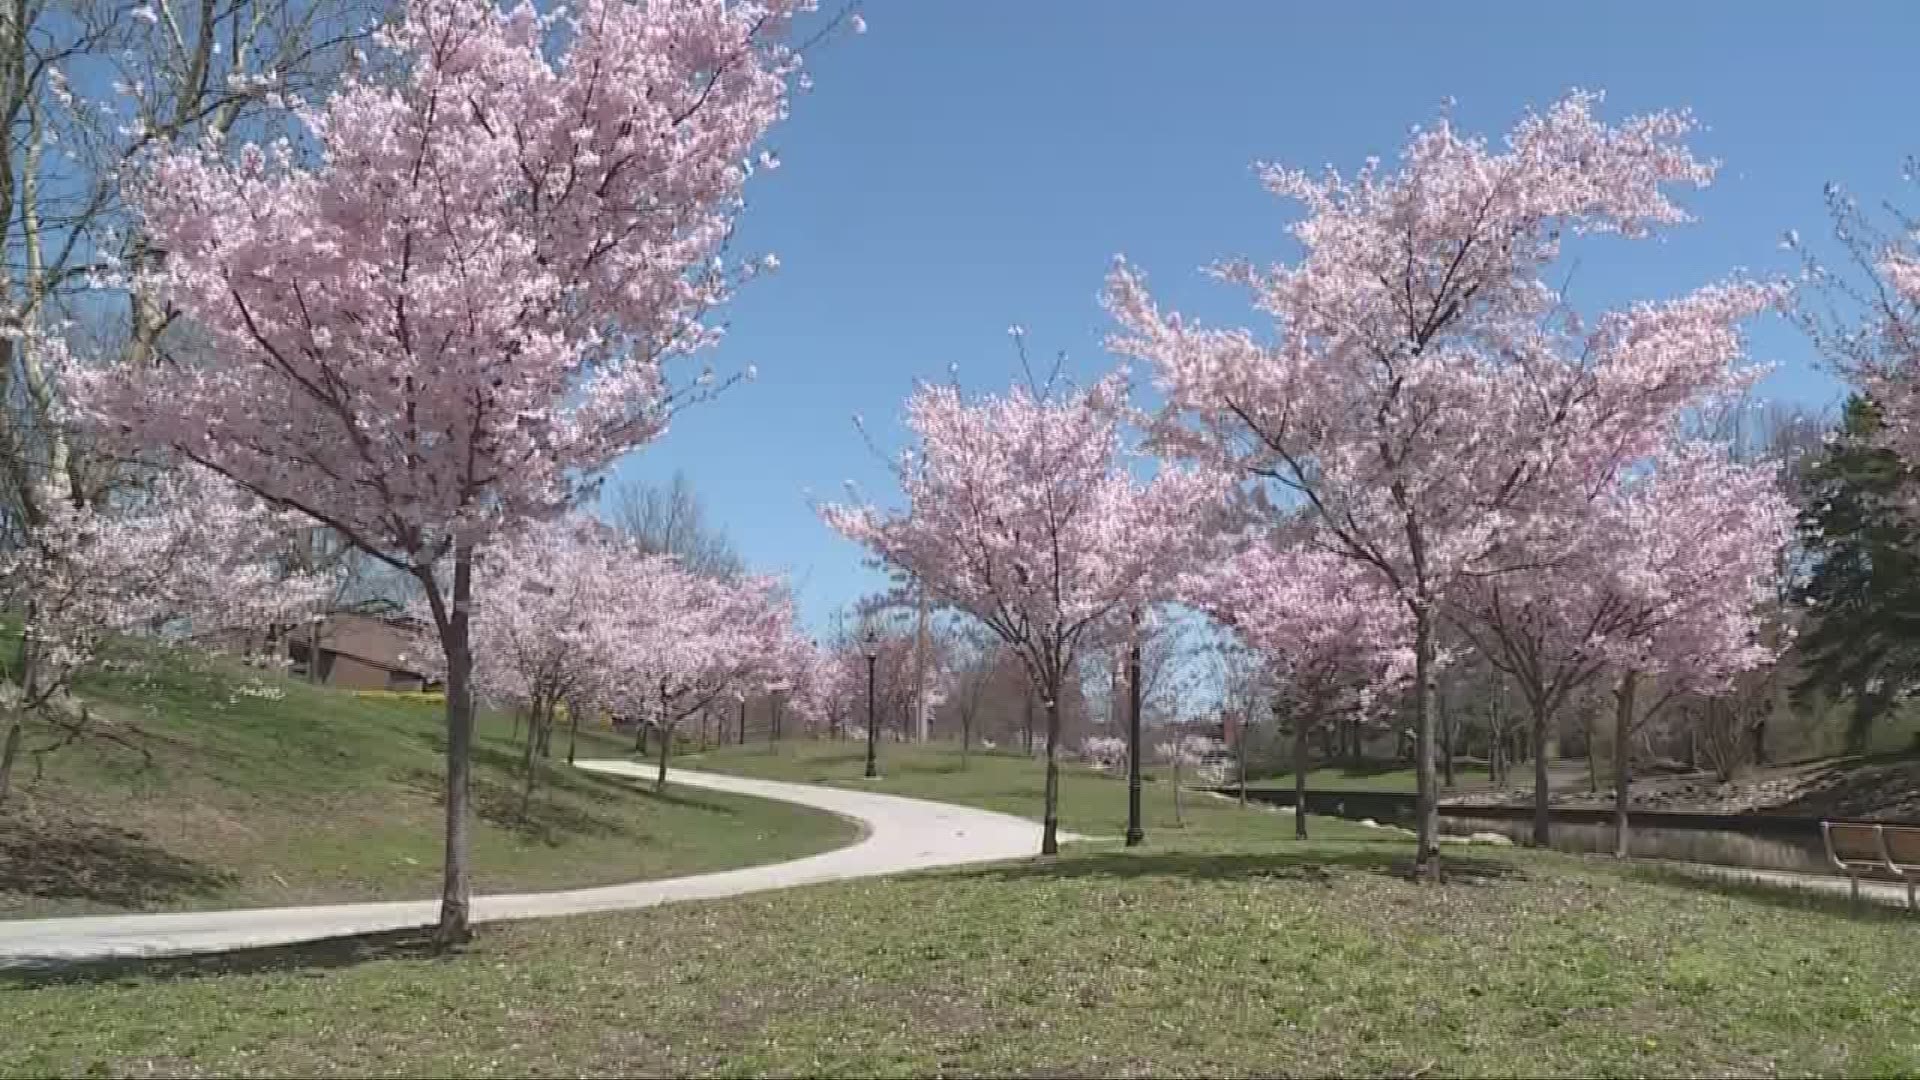 The hidden cherry blossoms in NEO